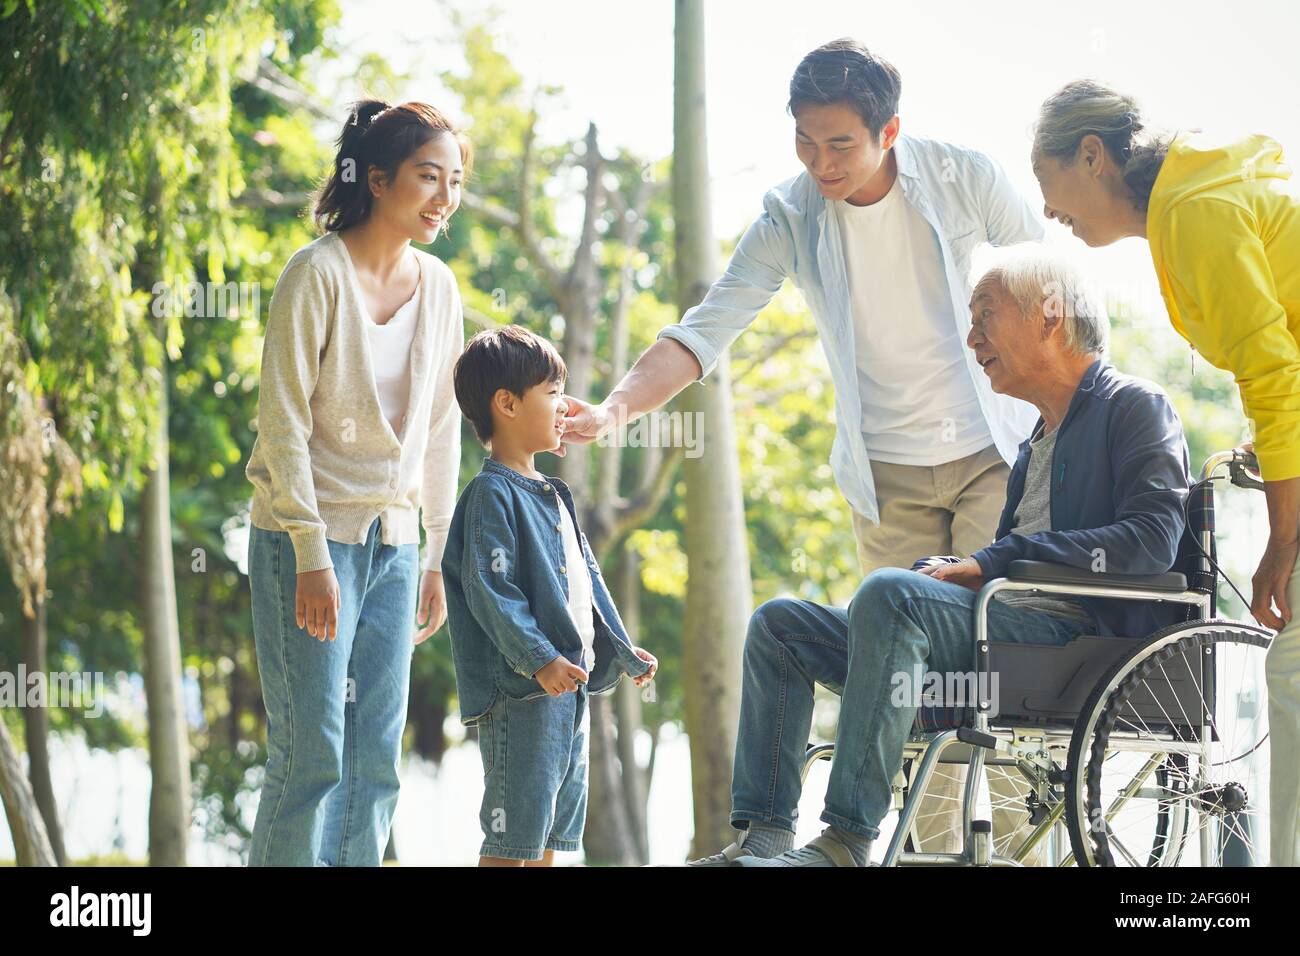 Happy asian family having fun outdoors in park Banque D'Images